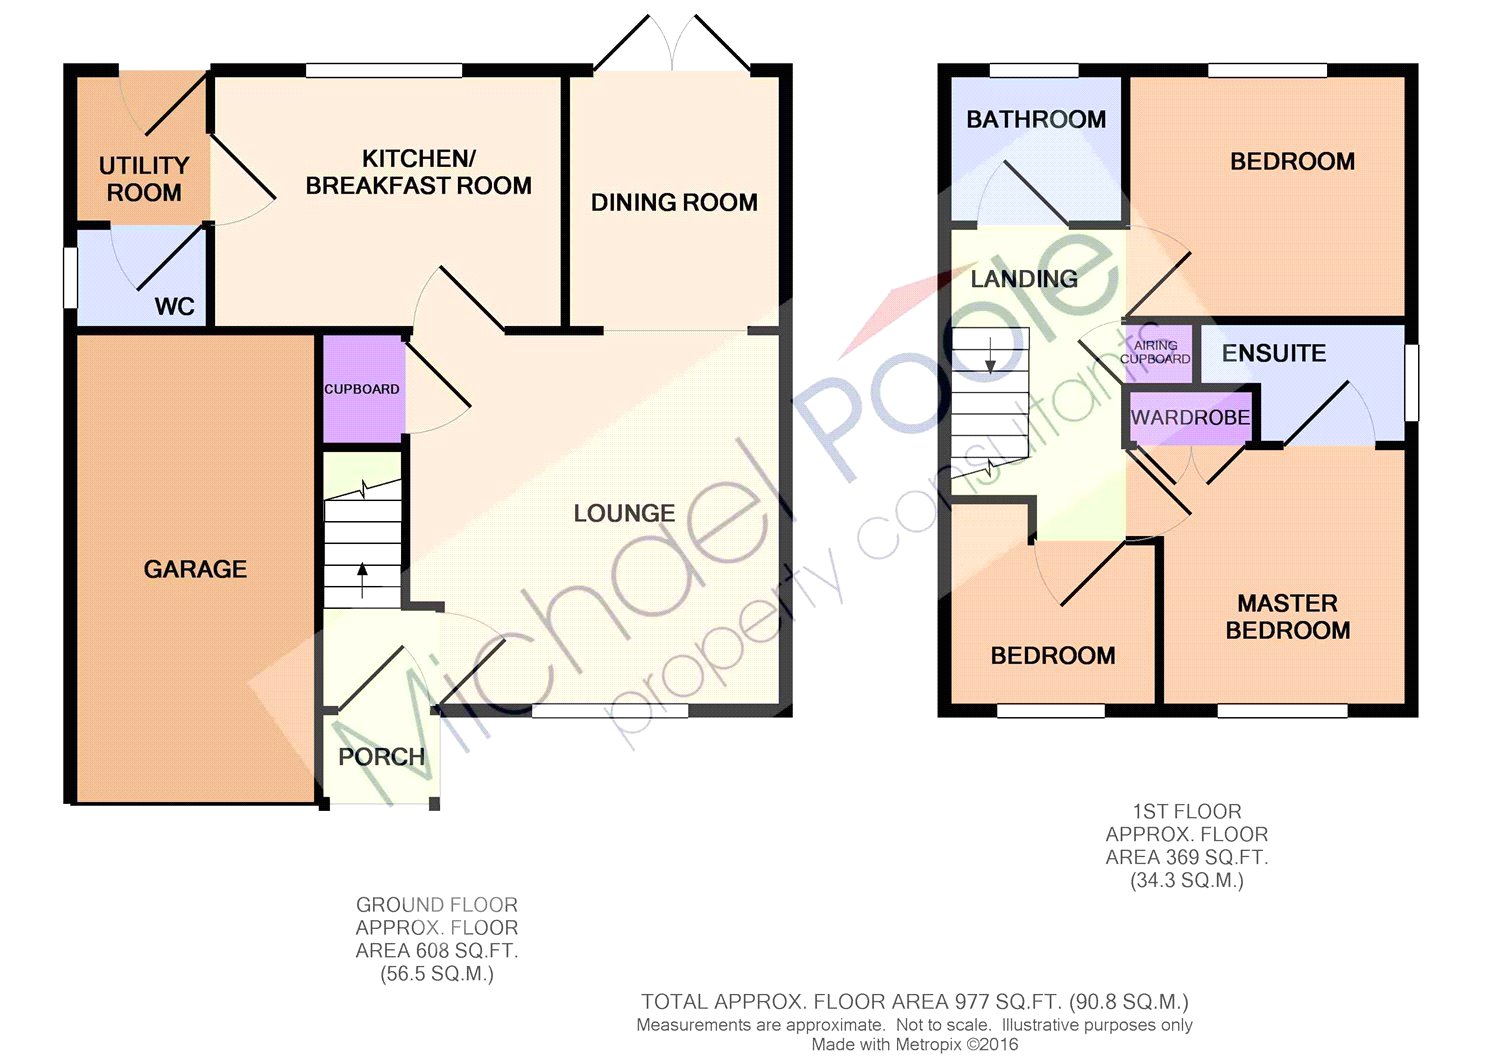 3 bed house to rent - Property floorplan